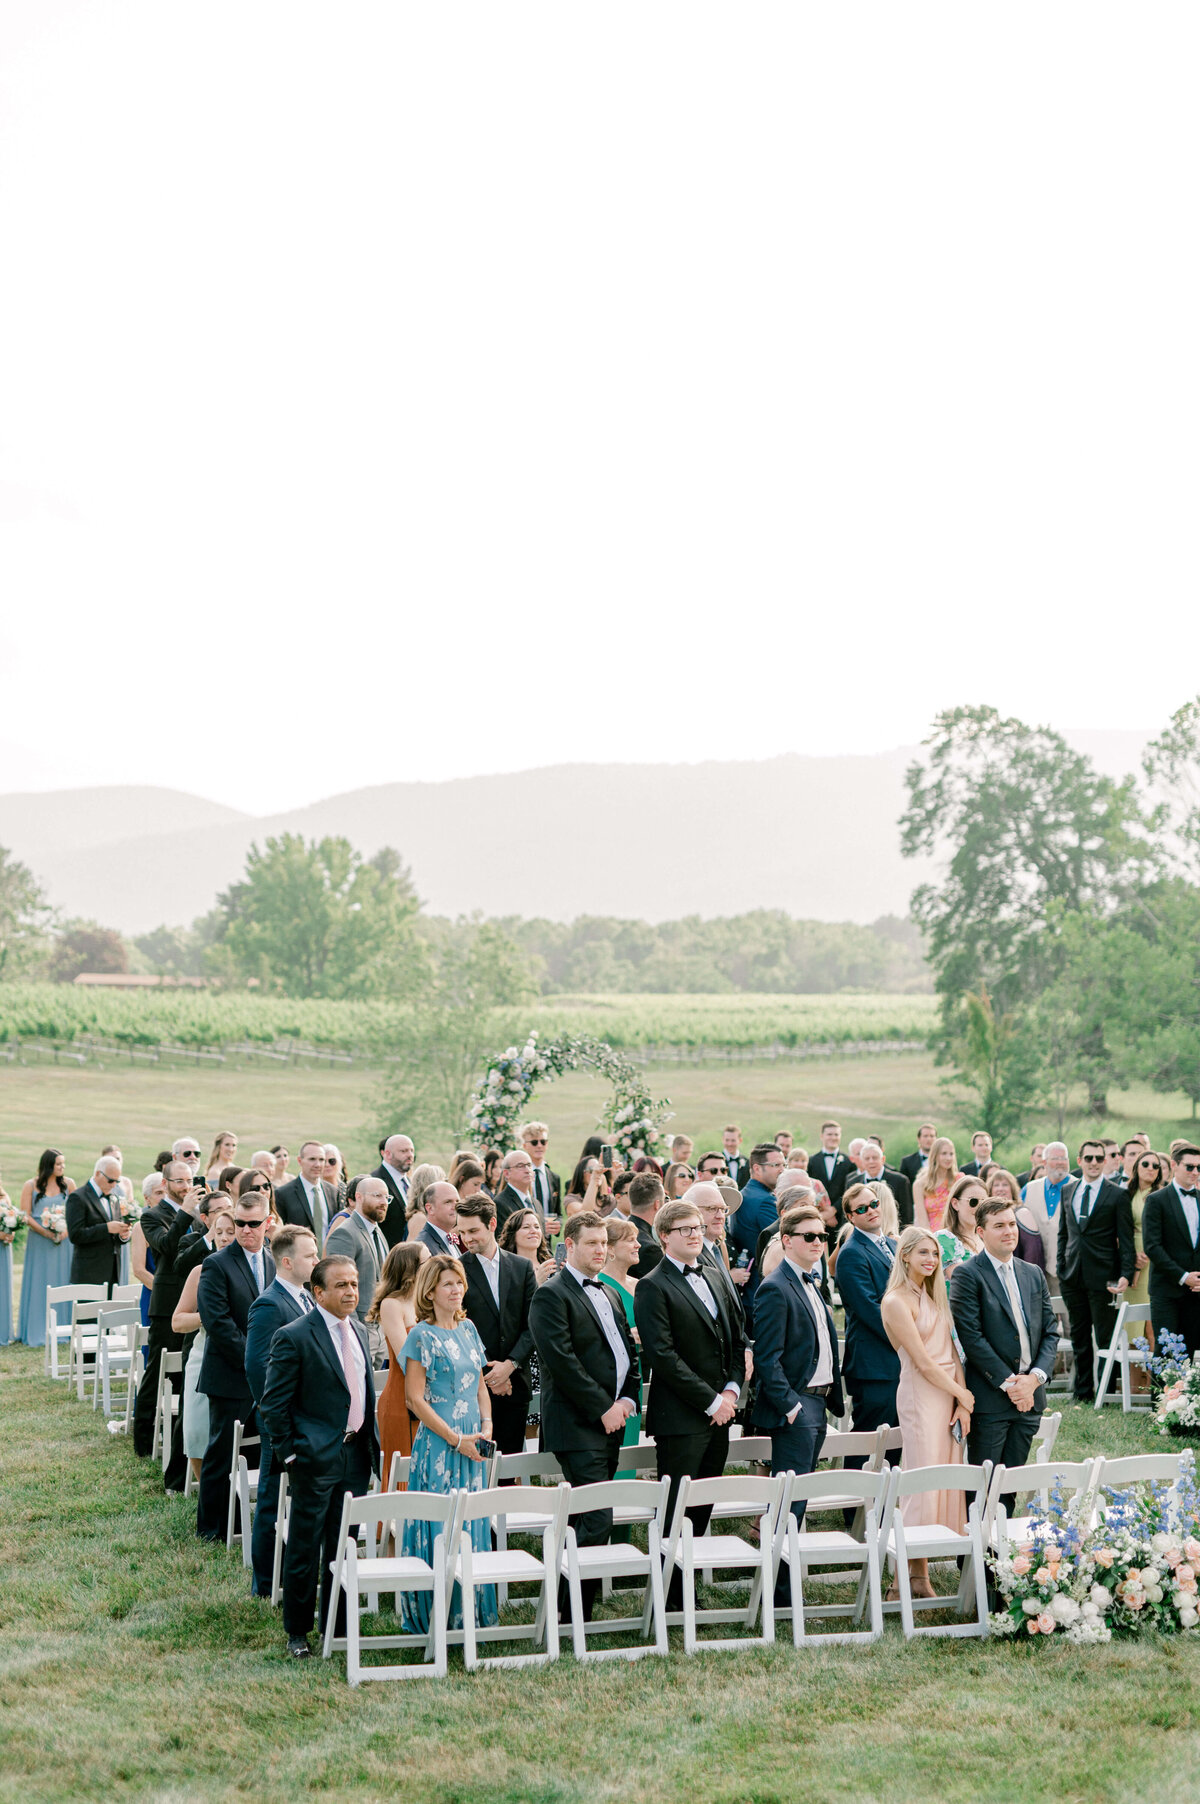 Guests watching joyfully as bride walks down the aisle with mountains in the background